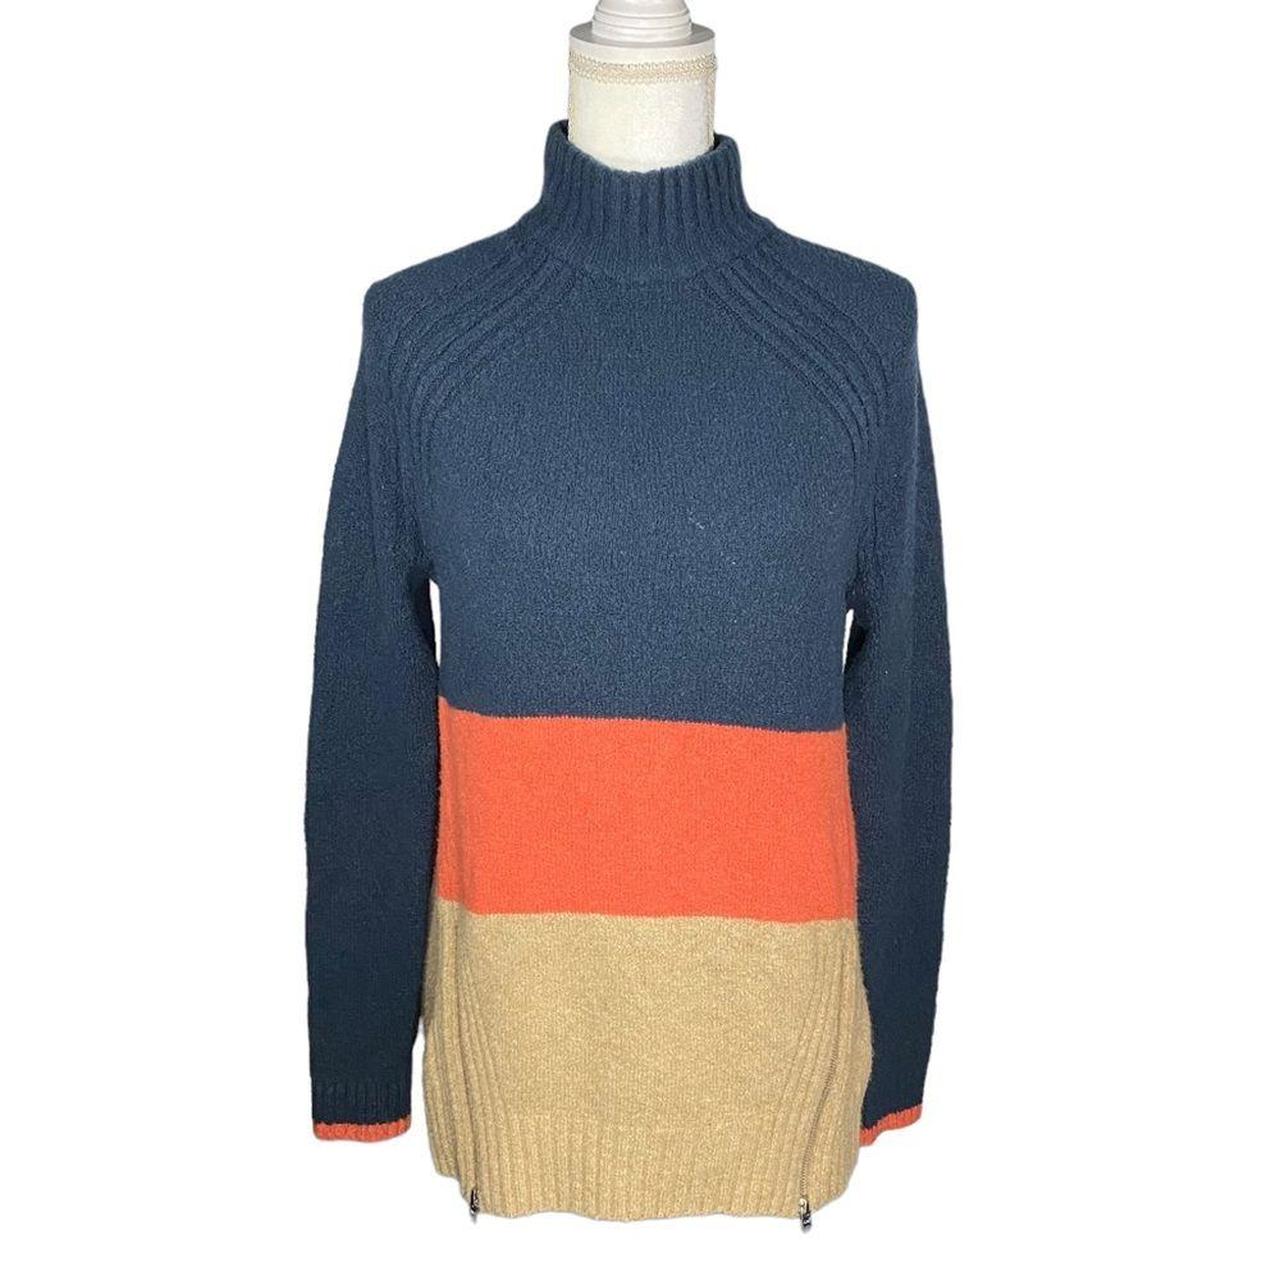 Abercrombie & Fitch Women's Blue and Orange Jumper